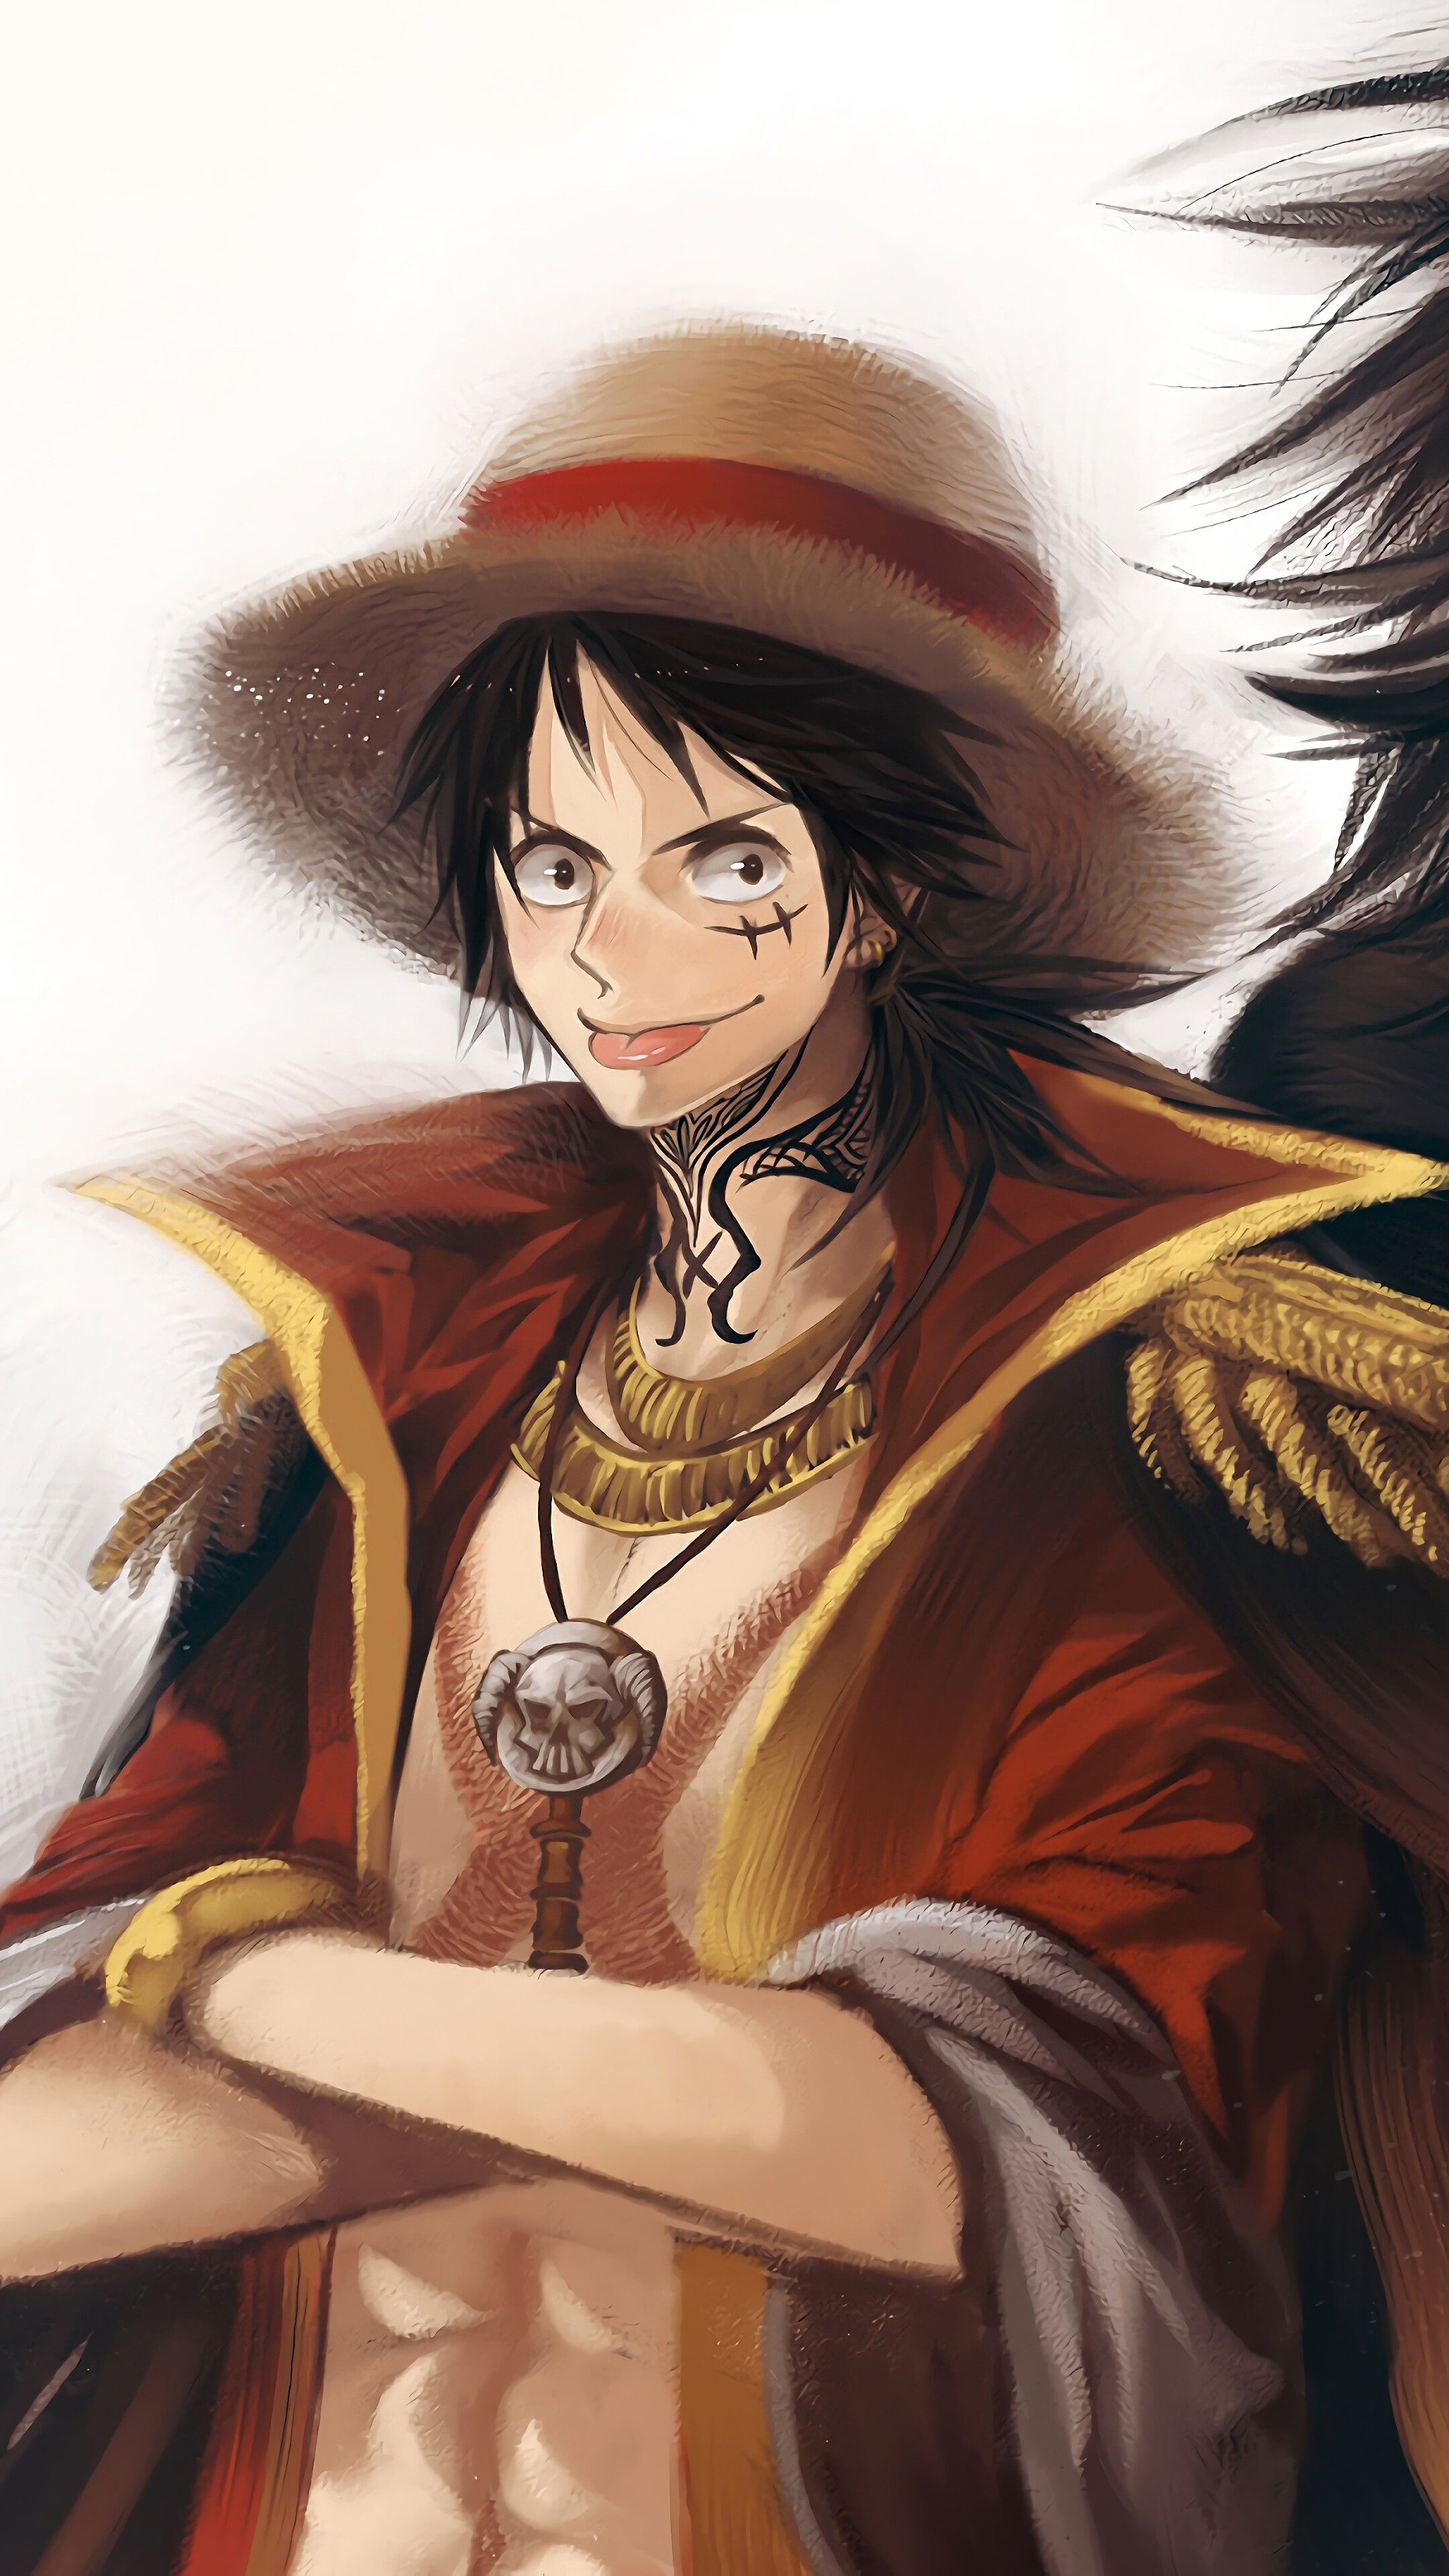 Monkey D Luffy wallpaper by Pugphone  Download on ZEDGE  0a30